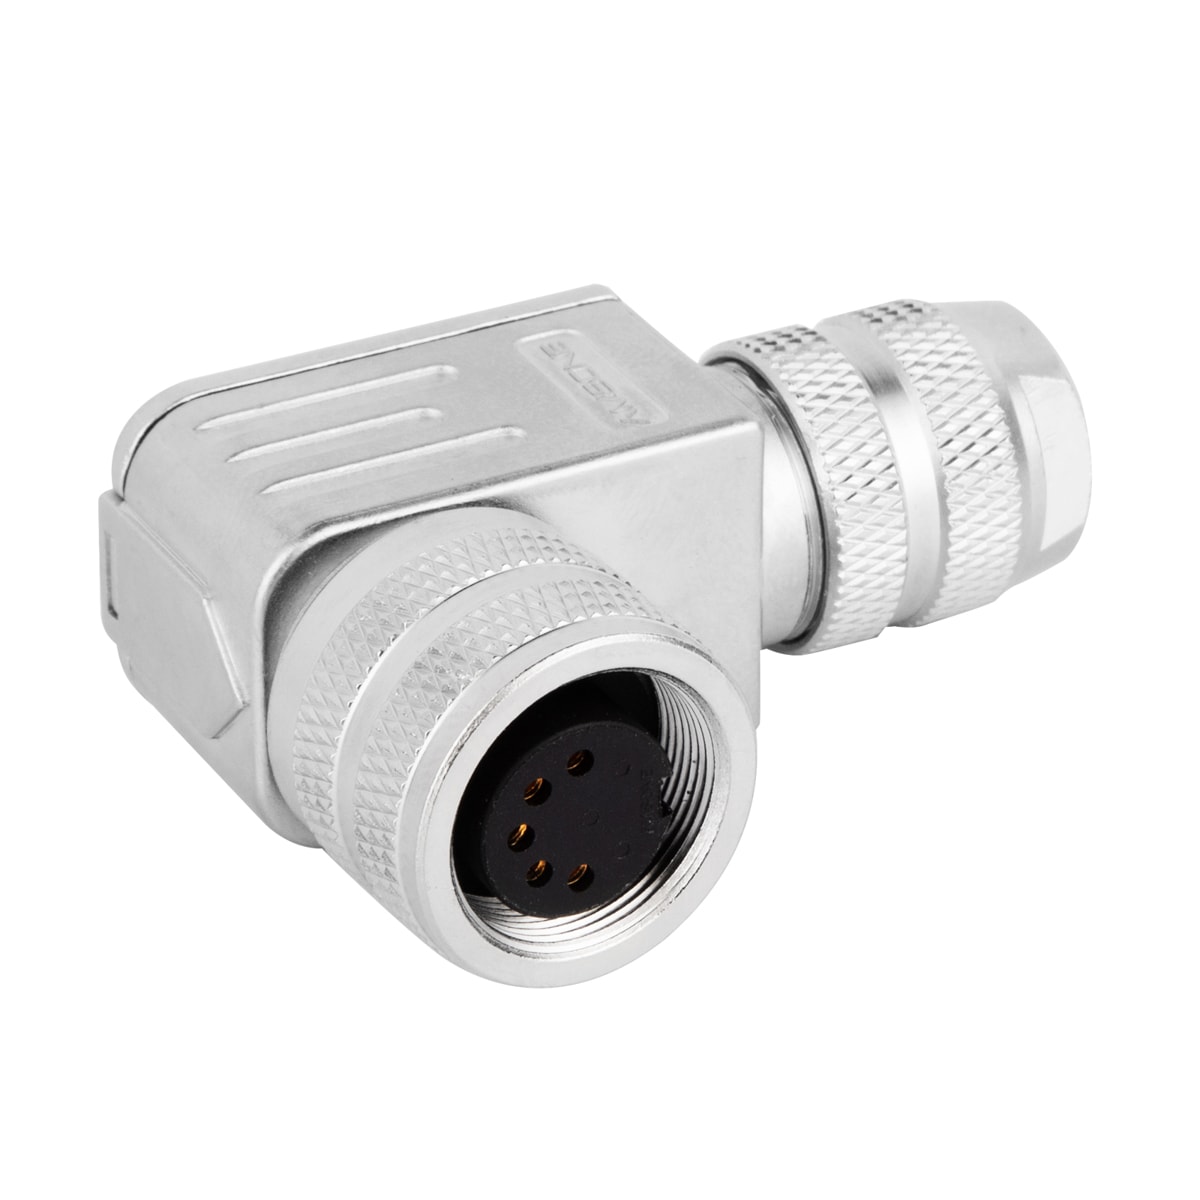 M16 cable connector, female, contacts: 5, fiel dassembly  type, solder connection, right angled, IP67, UL certified